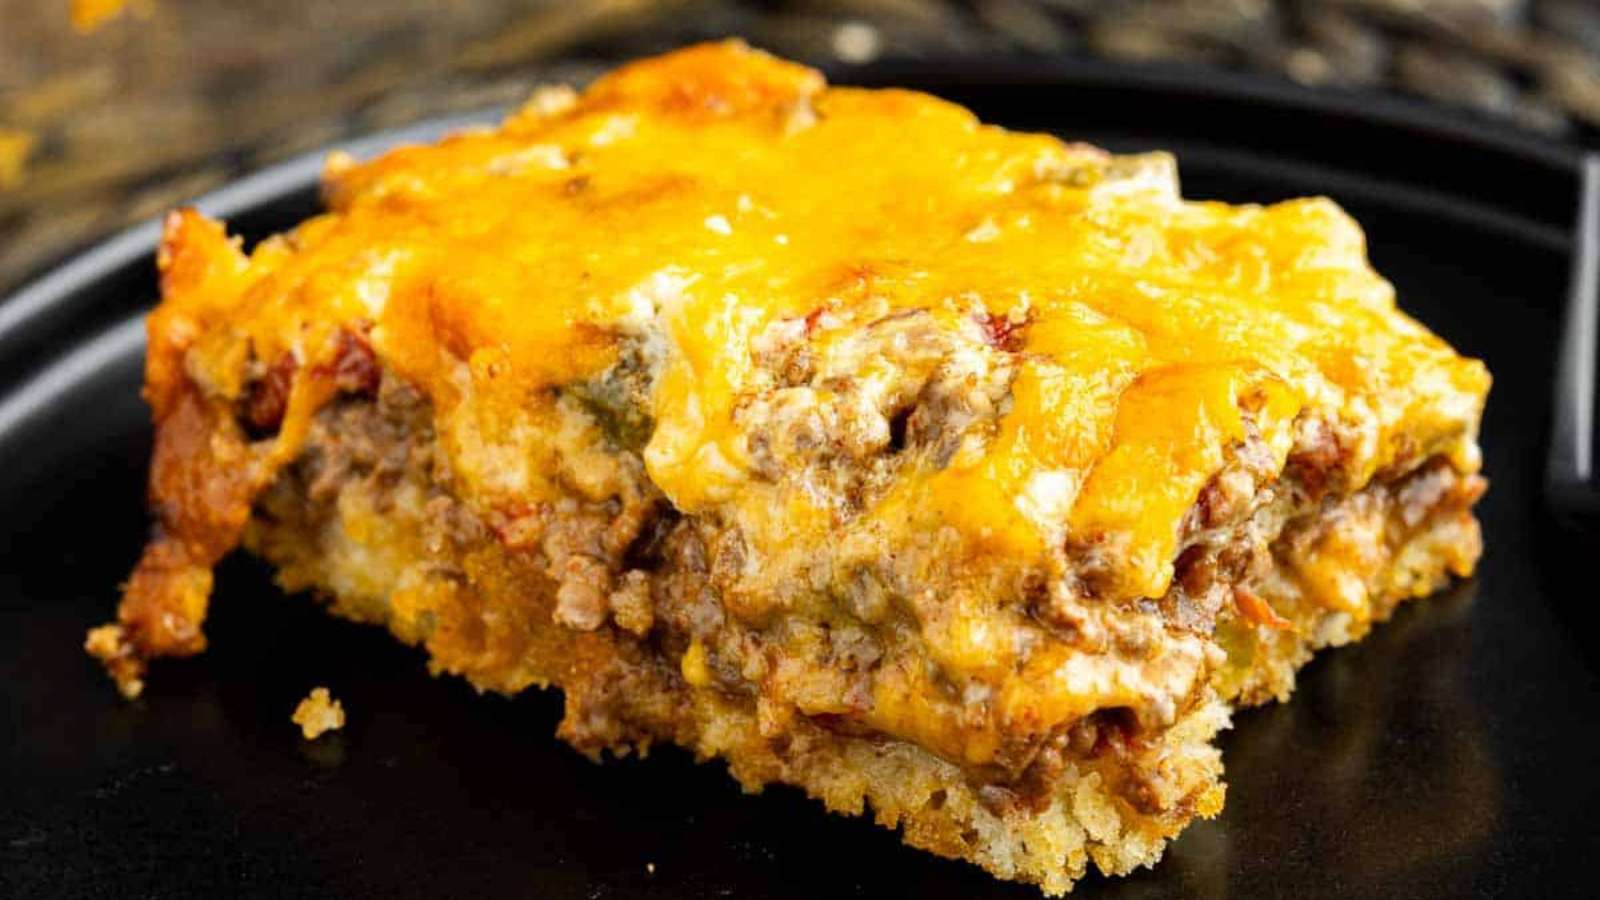 A piece of meat and cheese casserole on a black plate.